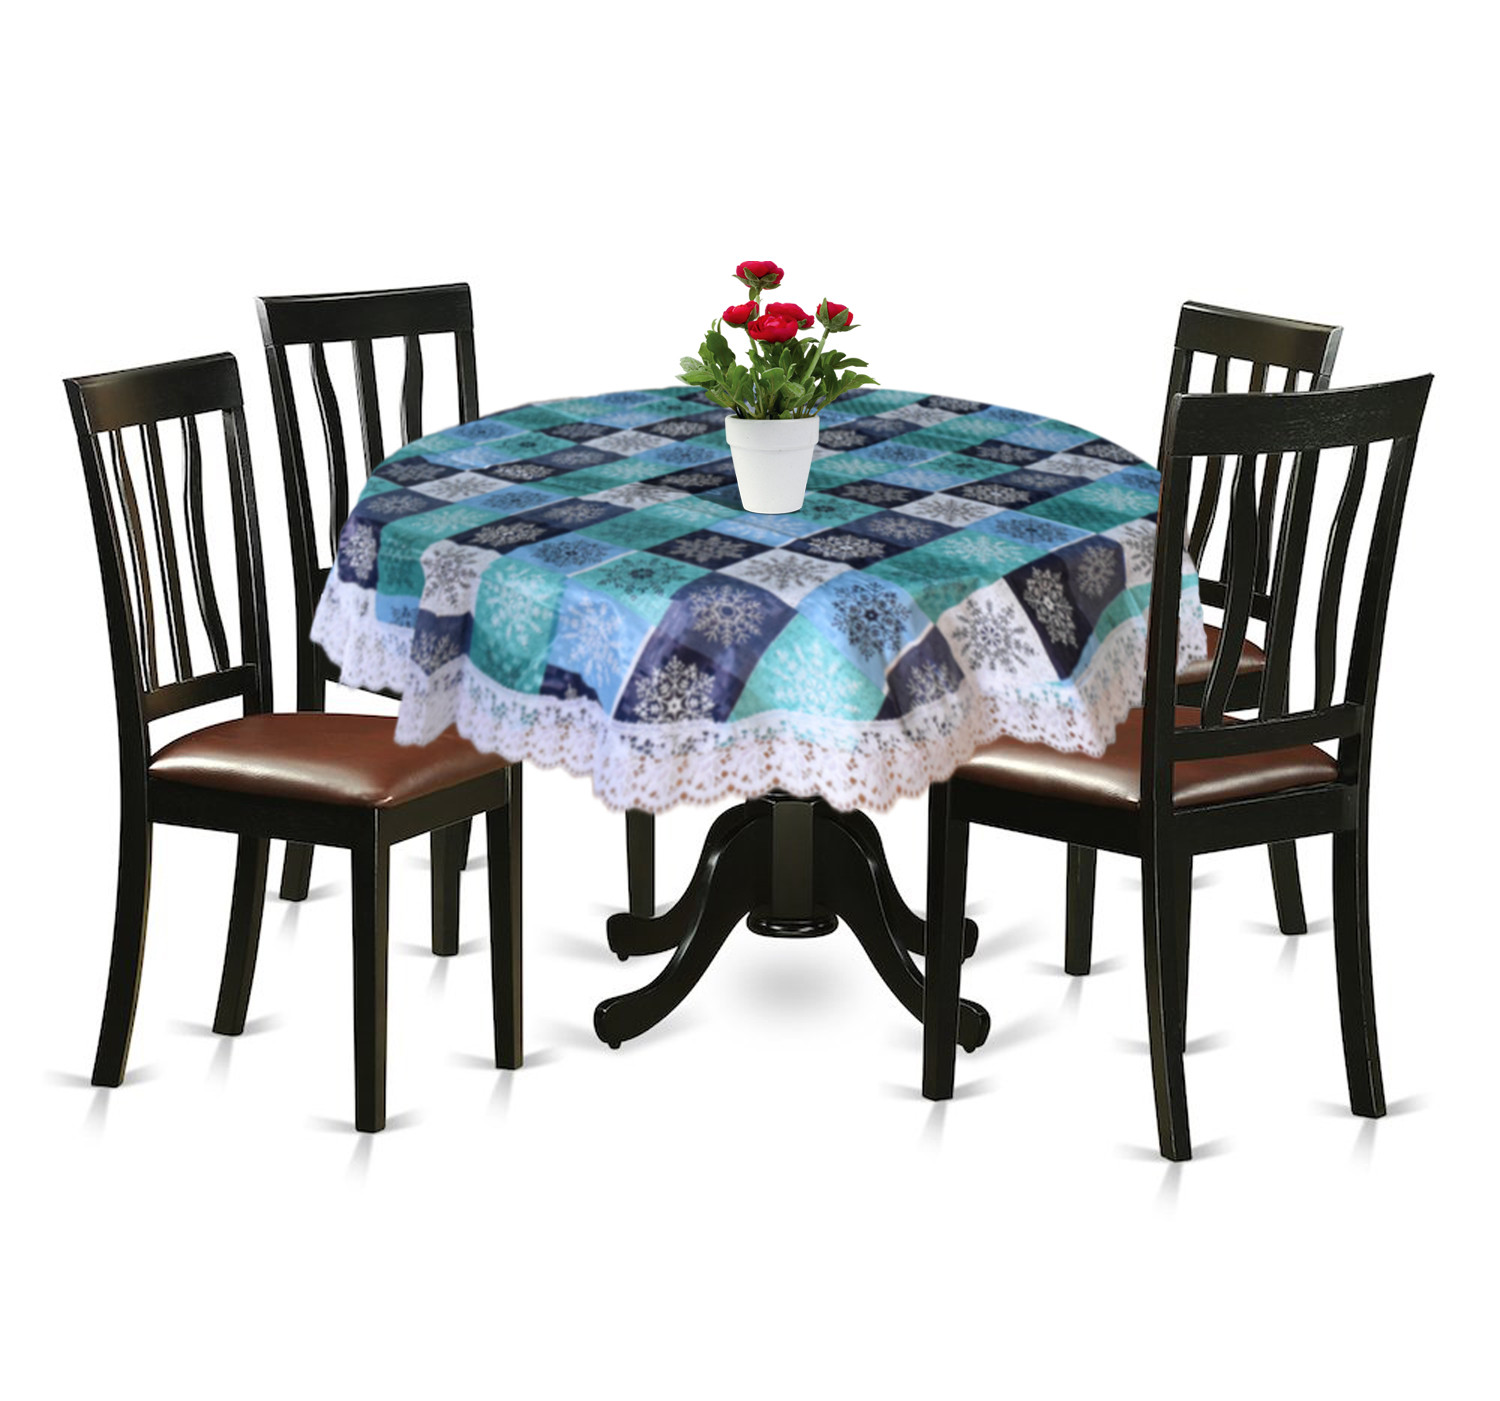 Kuber Industries Multi Check Printed PVC 4 Seater Round Shape Table Cover, Protector With White Lace Border, 60